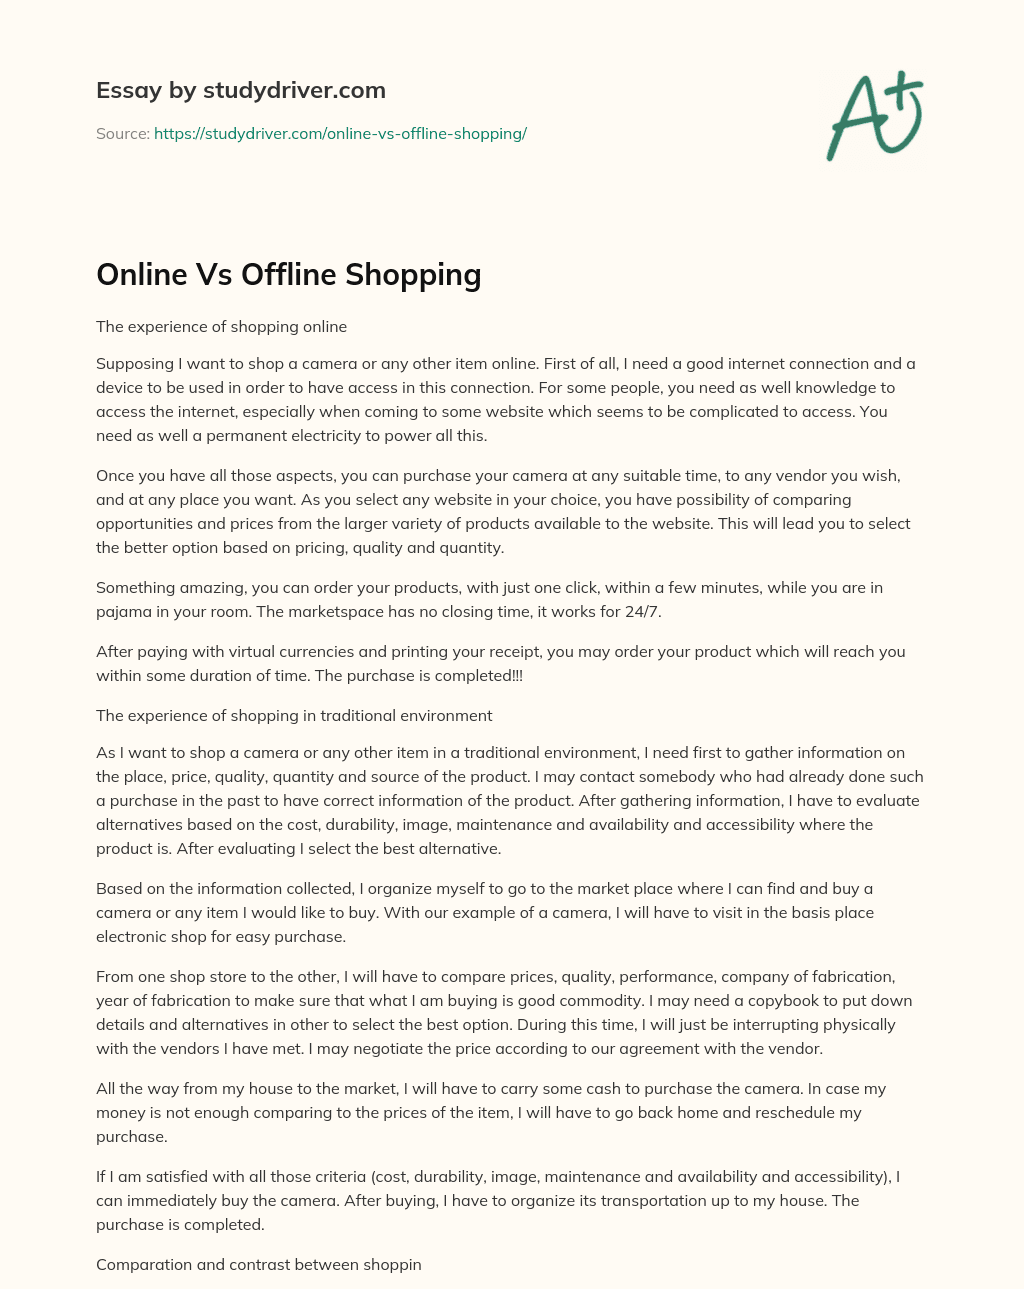 essay about shopping online